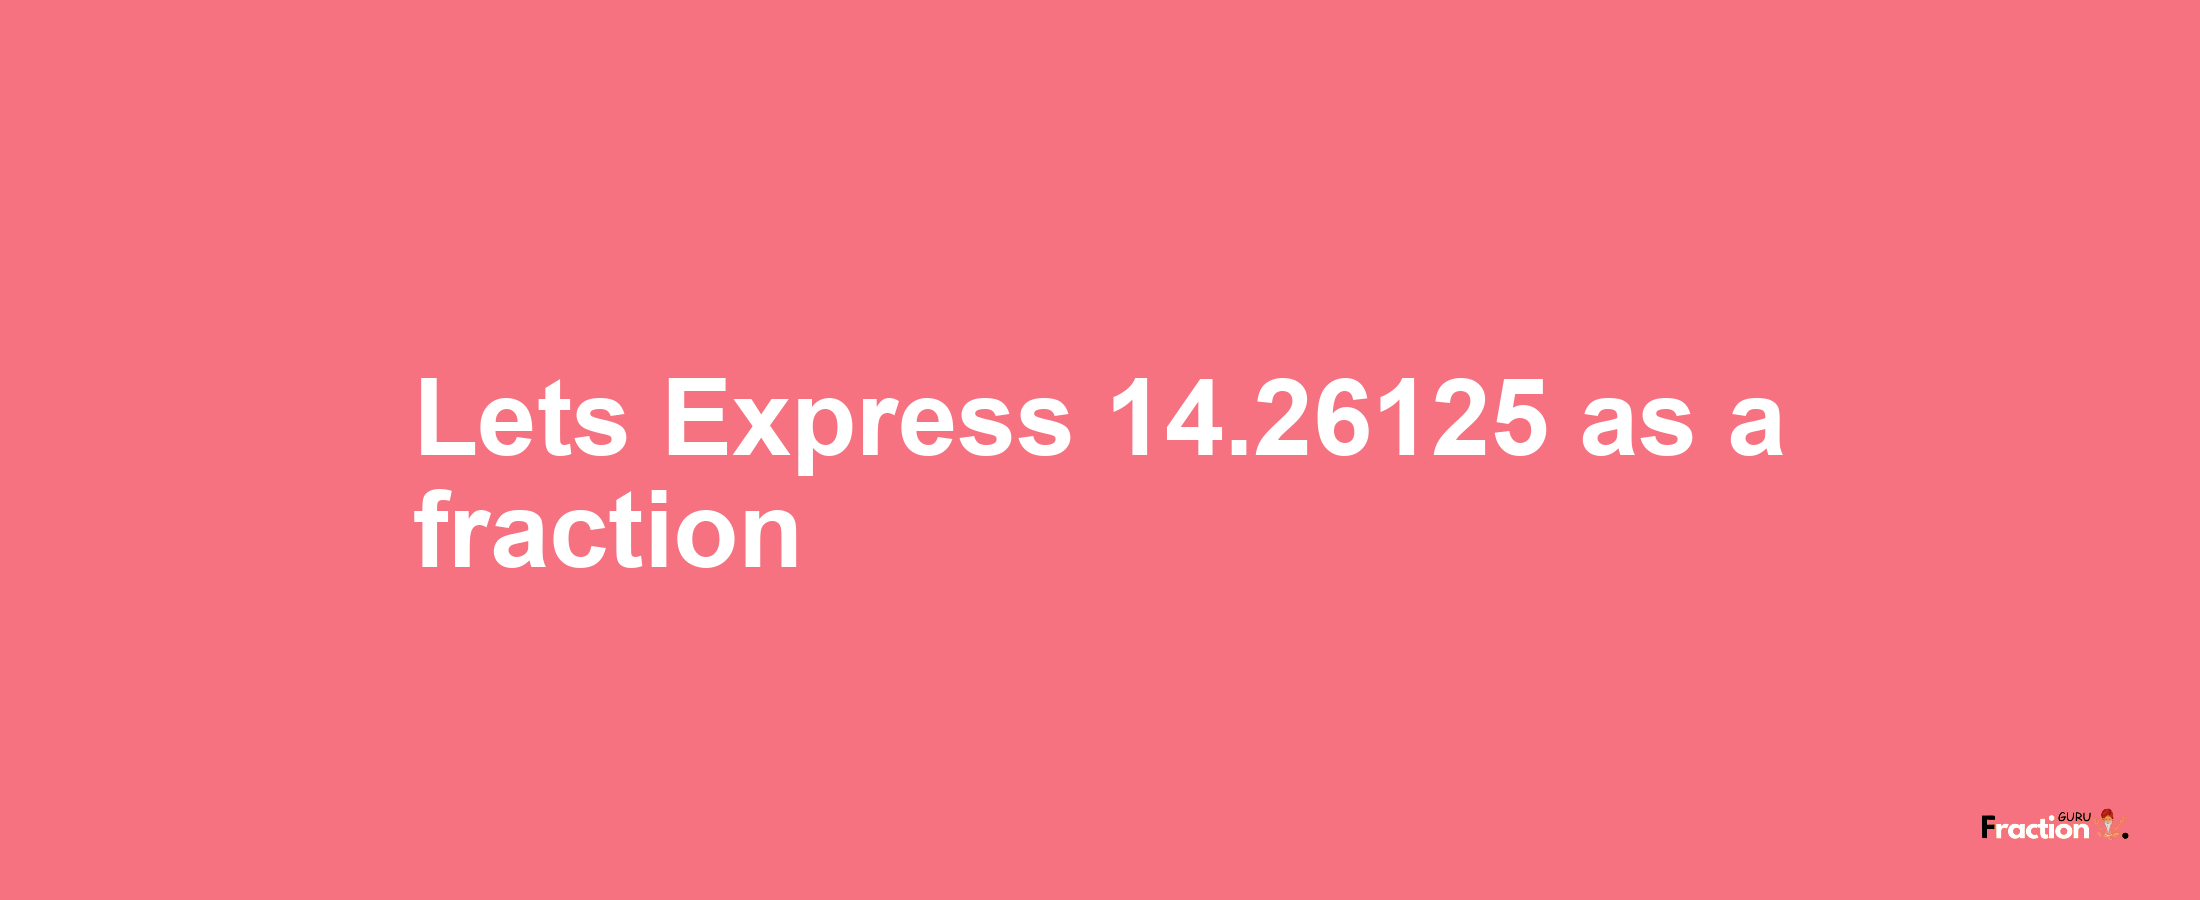 Lets Express 14.26125 as afraction